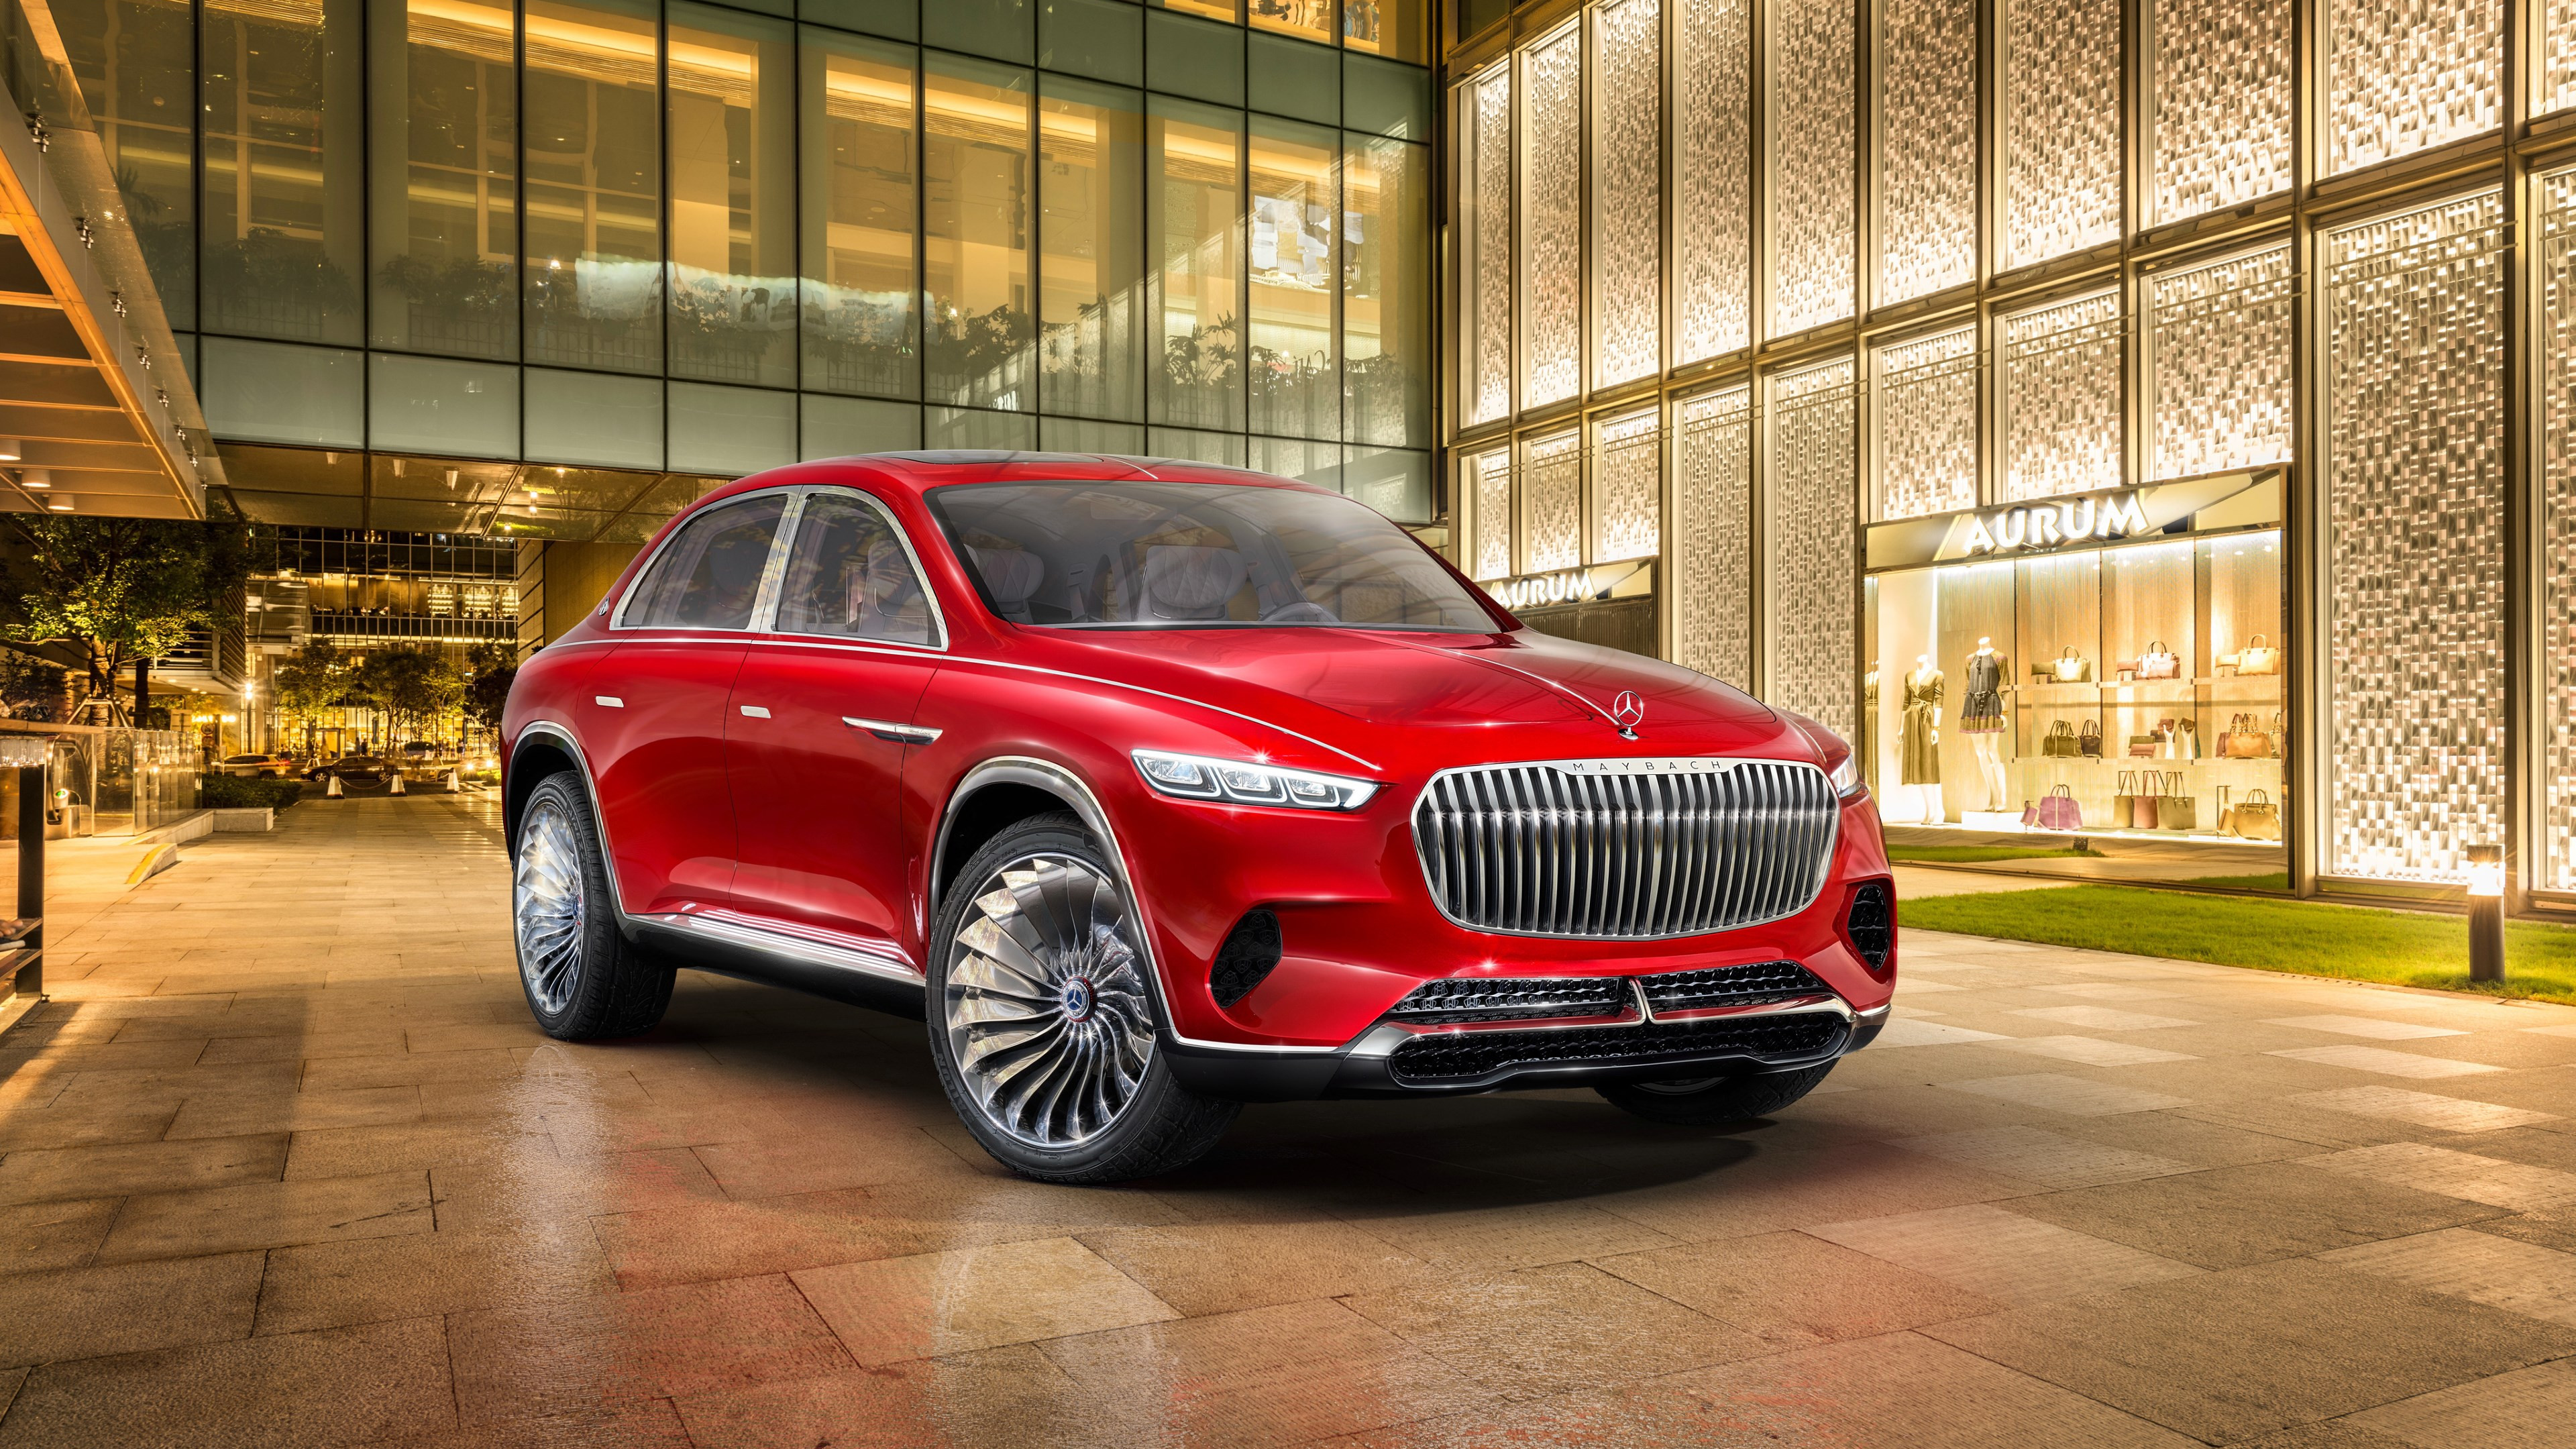 The Vision Mercedes Maybach Ultimate Luxury wallpaper 3840x2160